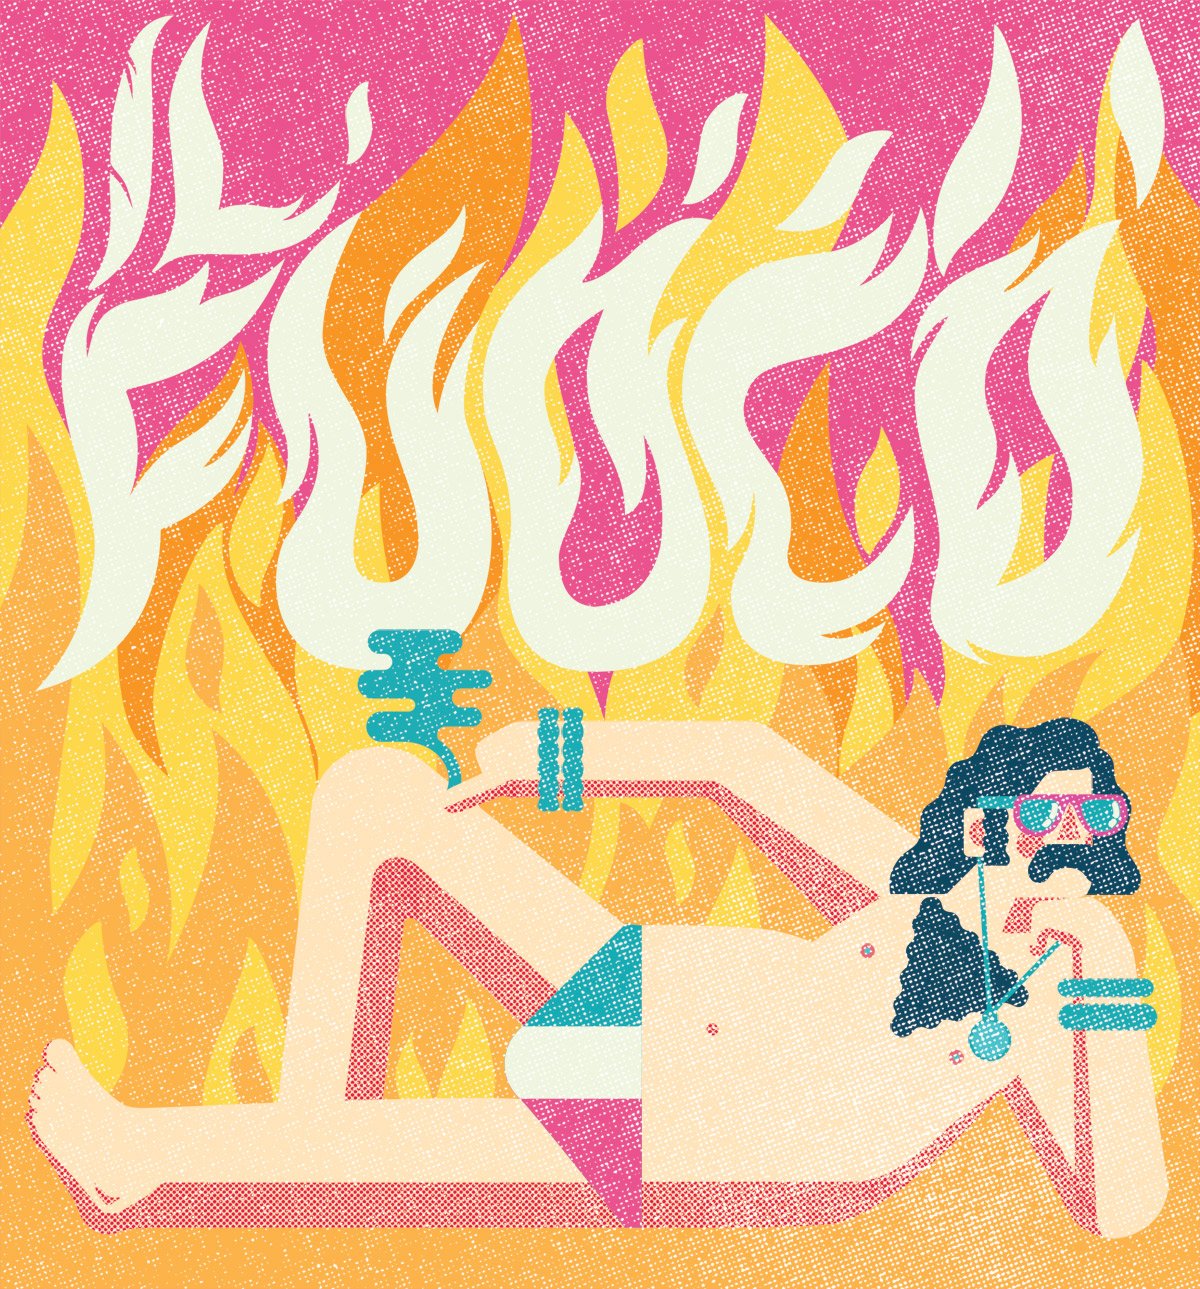 Il Fuoco, beer can illustration